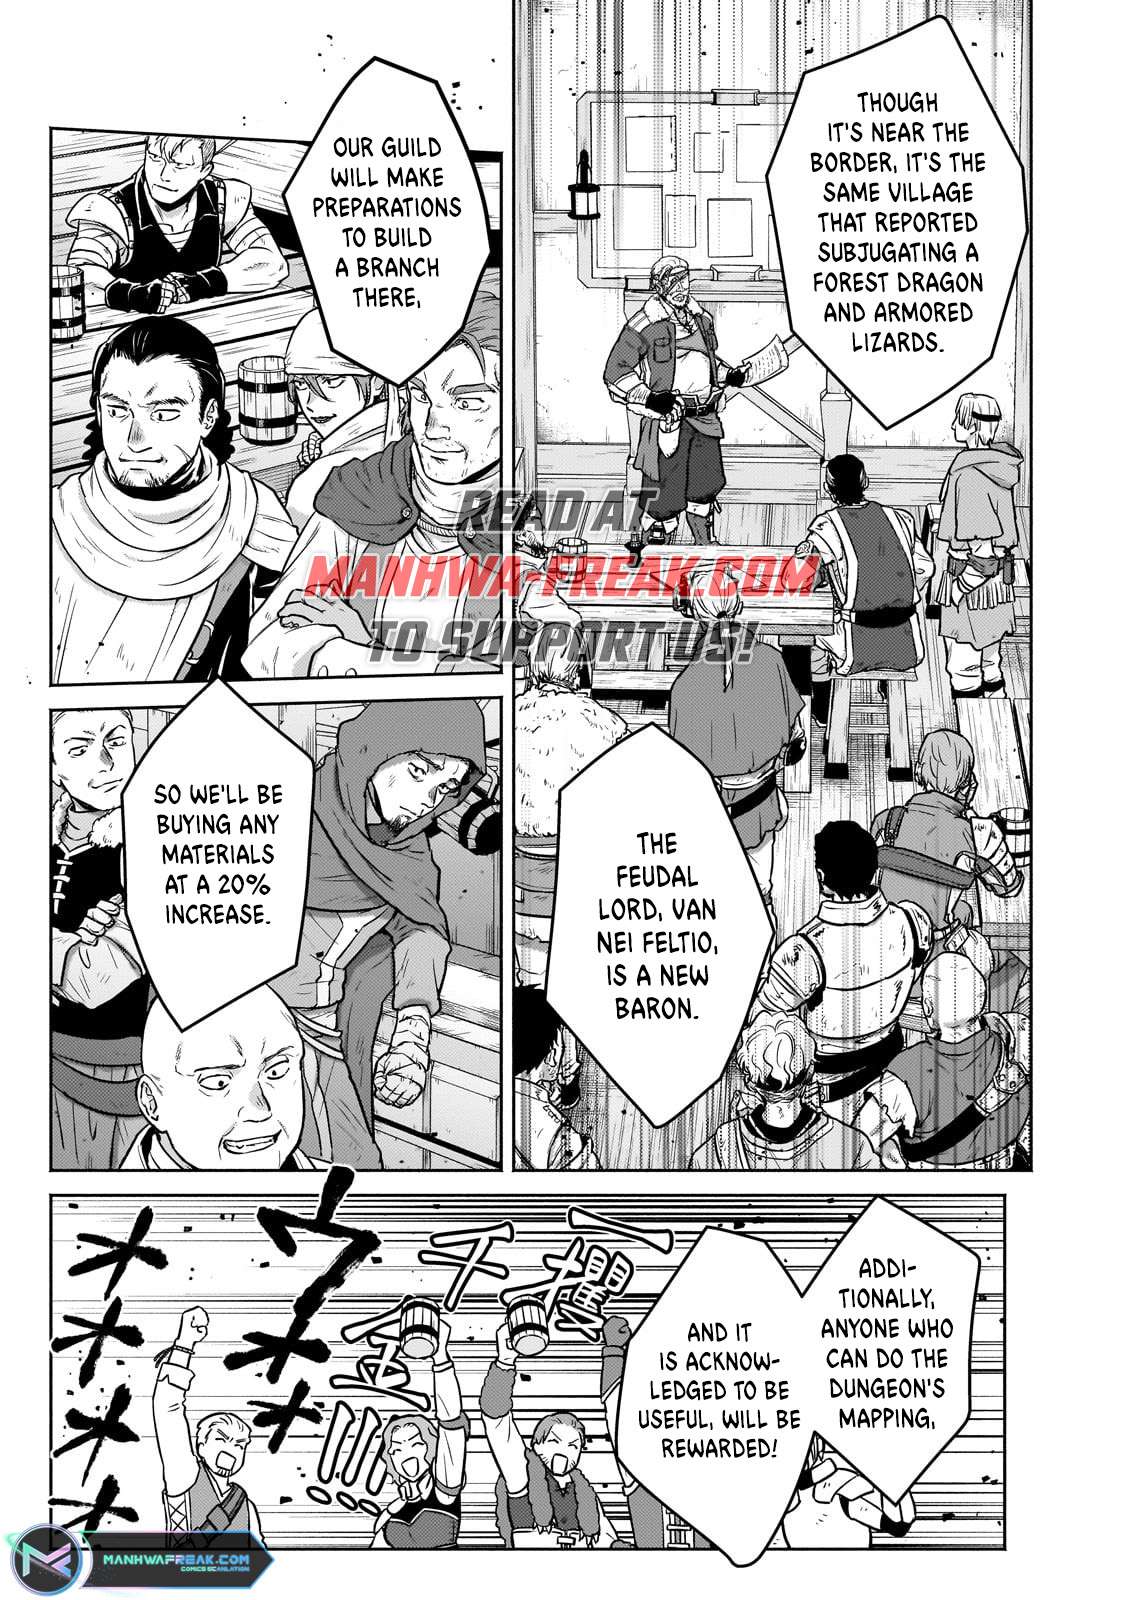 Easygoing Territory Defense By The Optimistic Lord: Production Magic Turns A Nameless Village Into The Strongest Fortified City - chapter 26.2 - #1